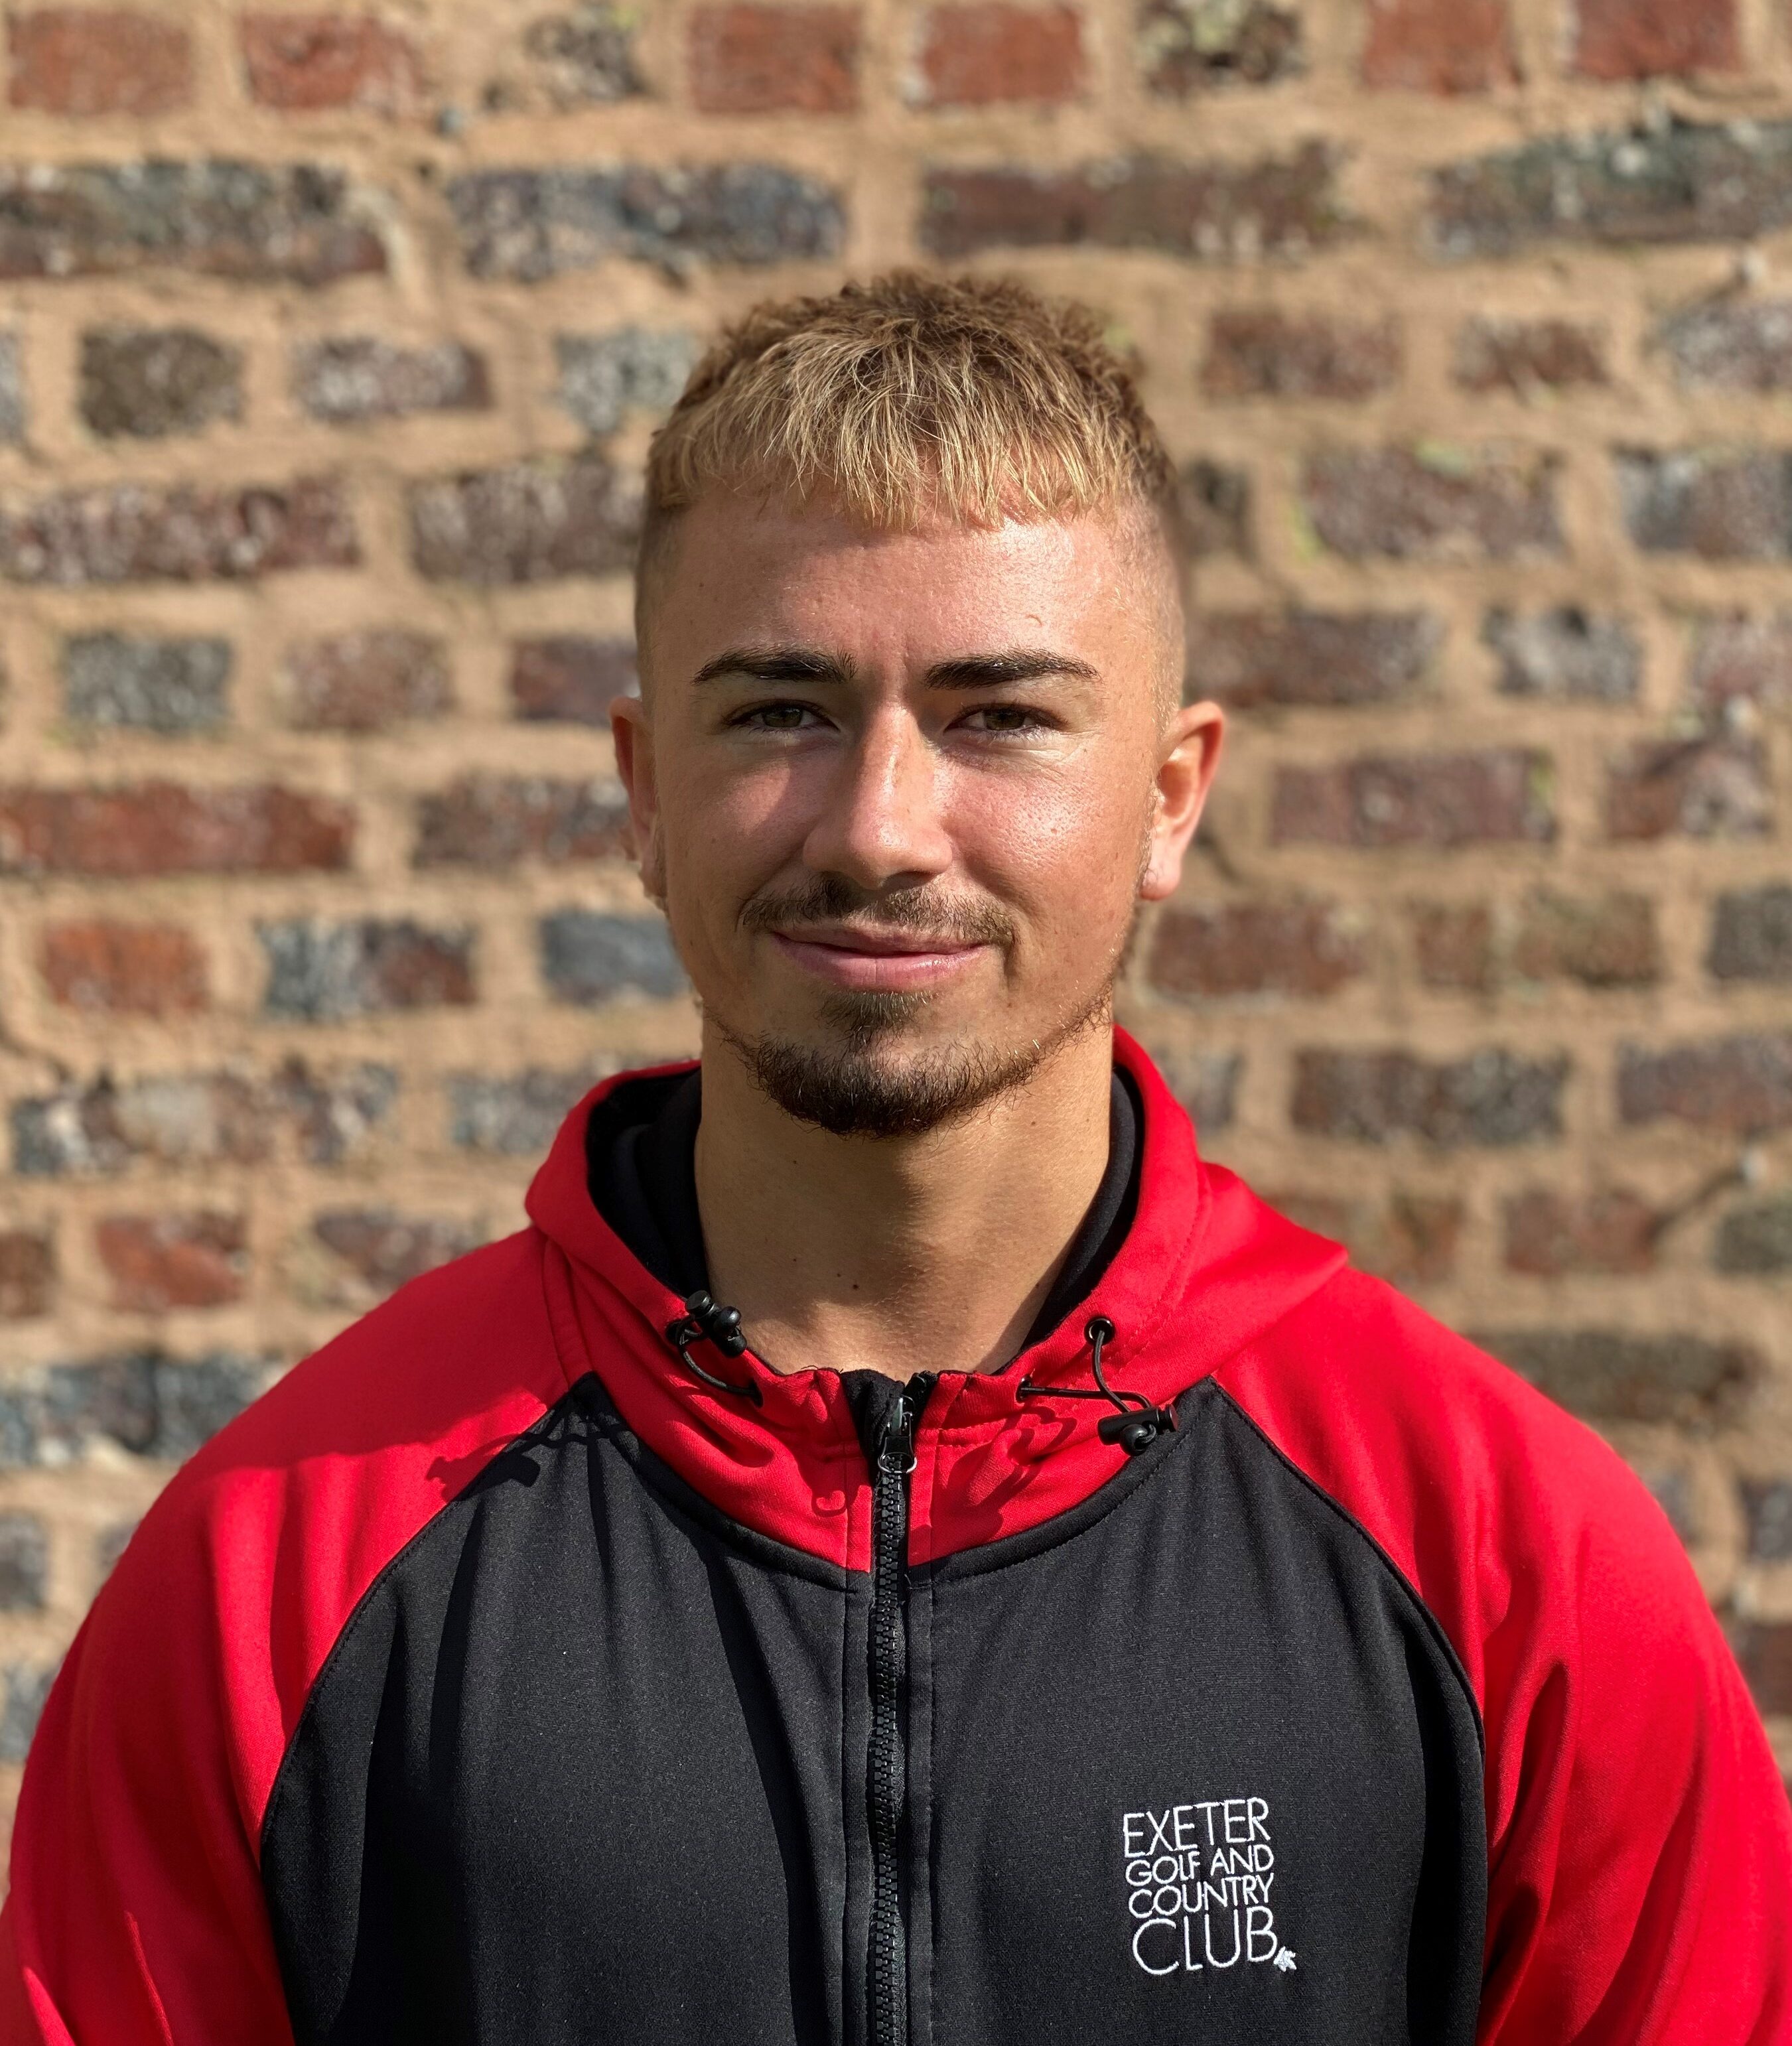 elliot page, personal trainer, personal training, exeter golf and country club